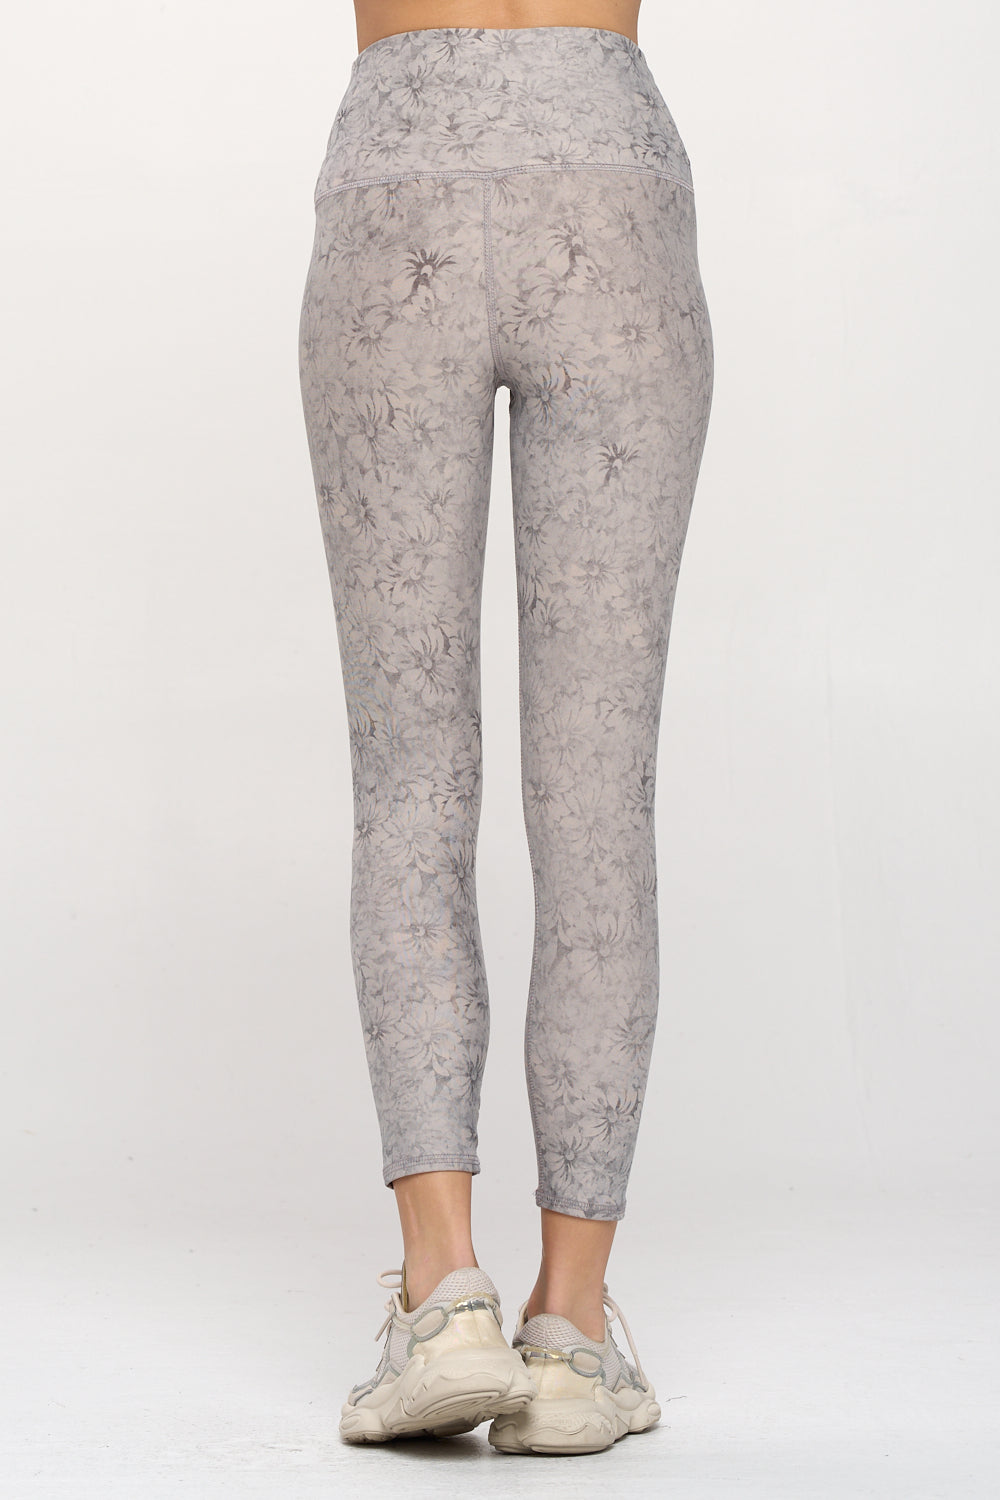 Mia - Dove Faded Floral Stamp 7/8 Legging (High-Waist) by EVCR